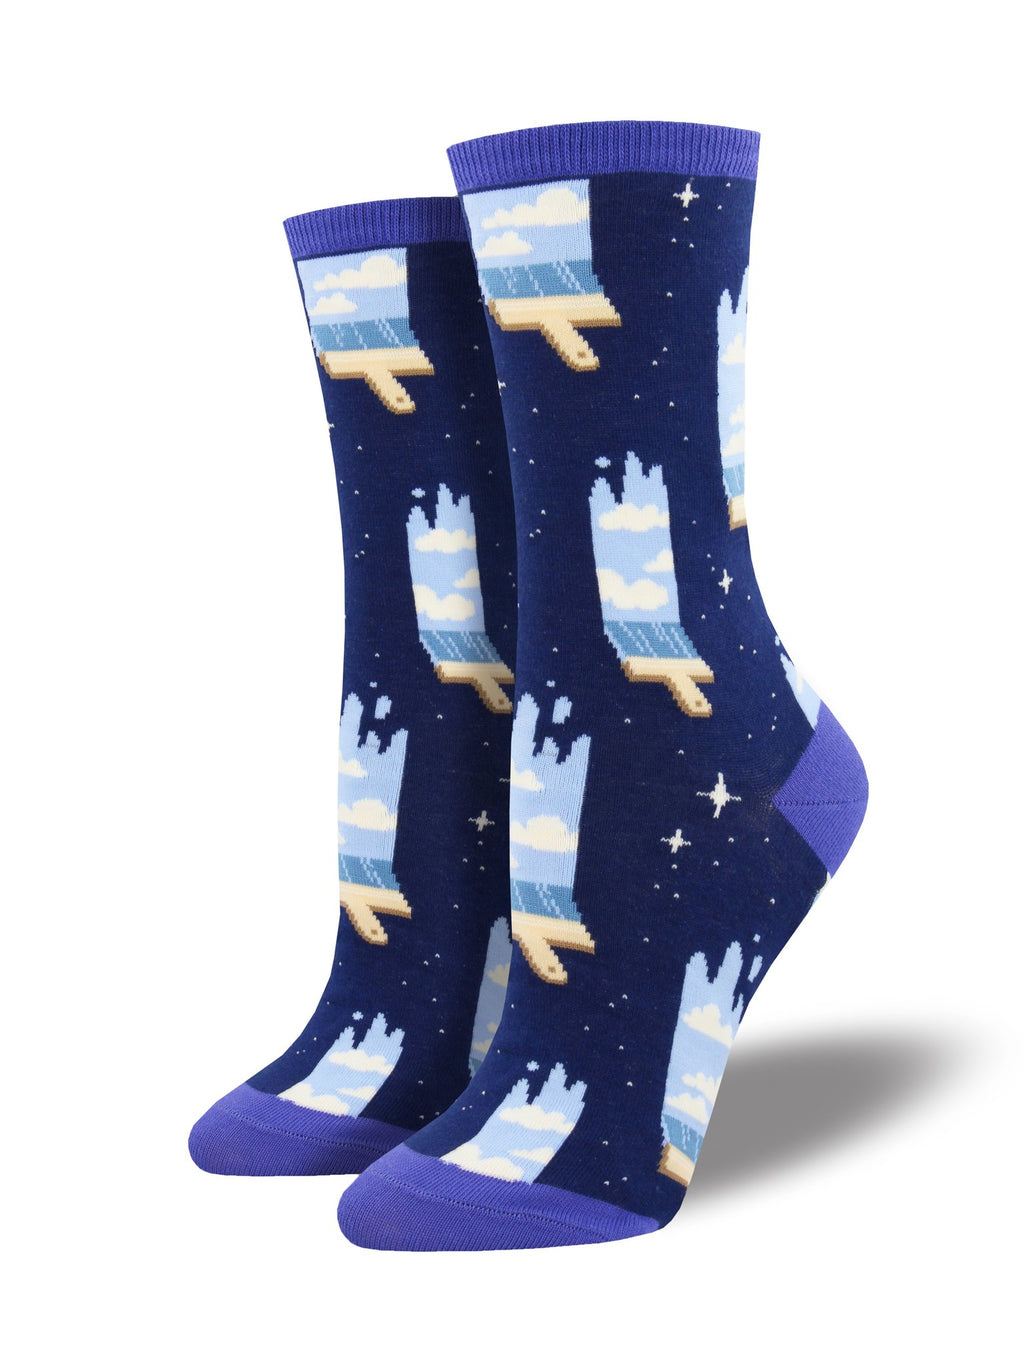 Painted Sock by KFI Collection 121 Winter Sky